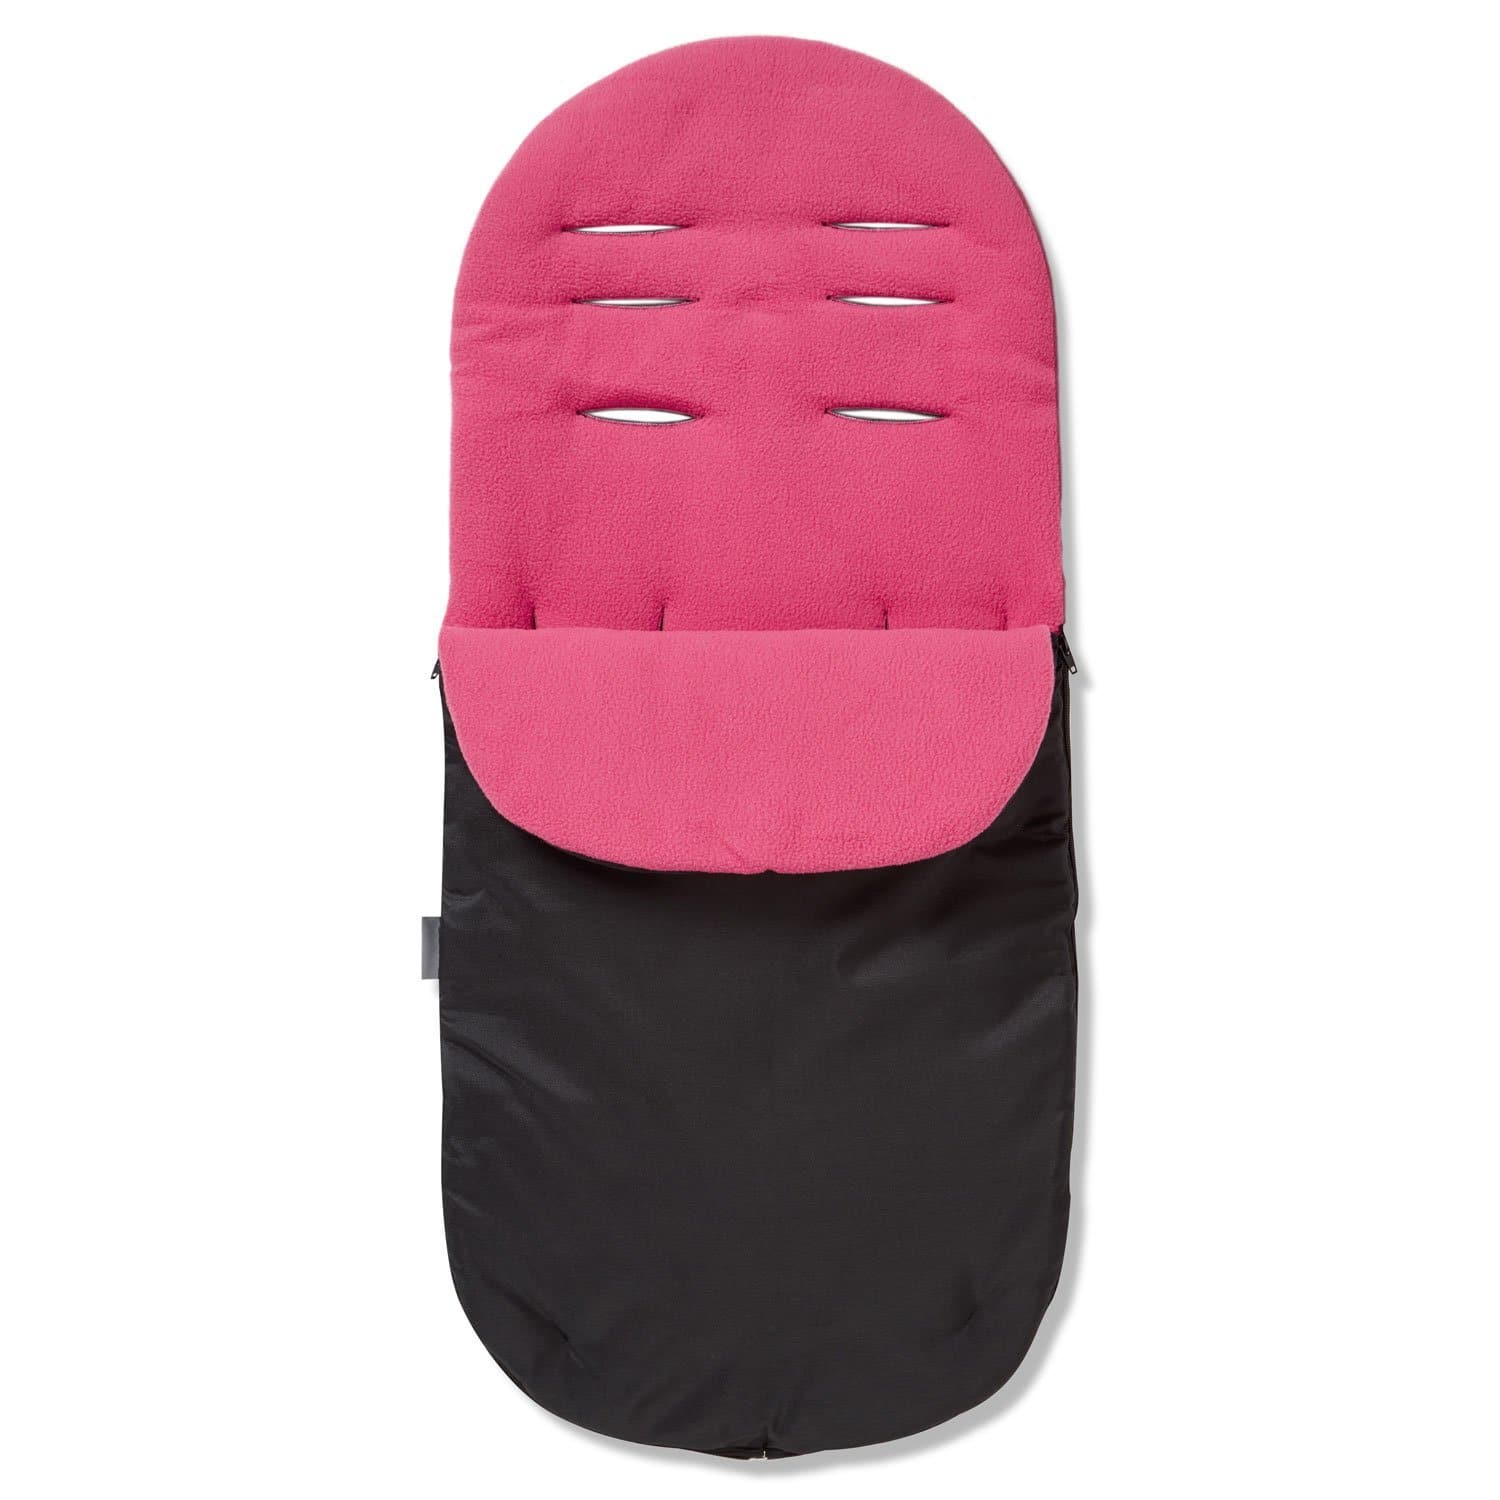 Footmuff / Cosy Toes Compatible with Zeta - Dark Pink / Fits All Models | For Your Little One